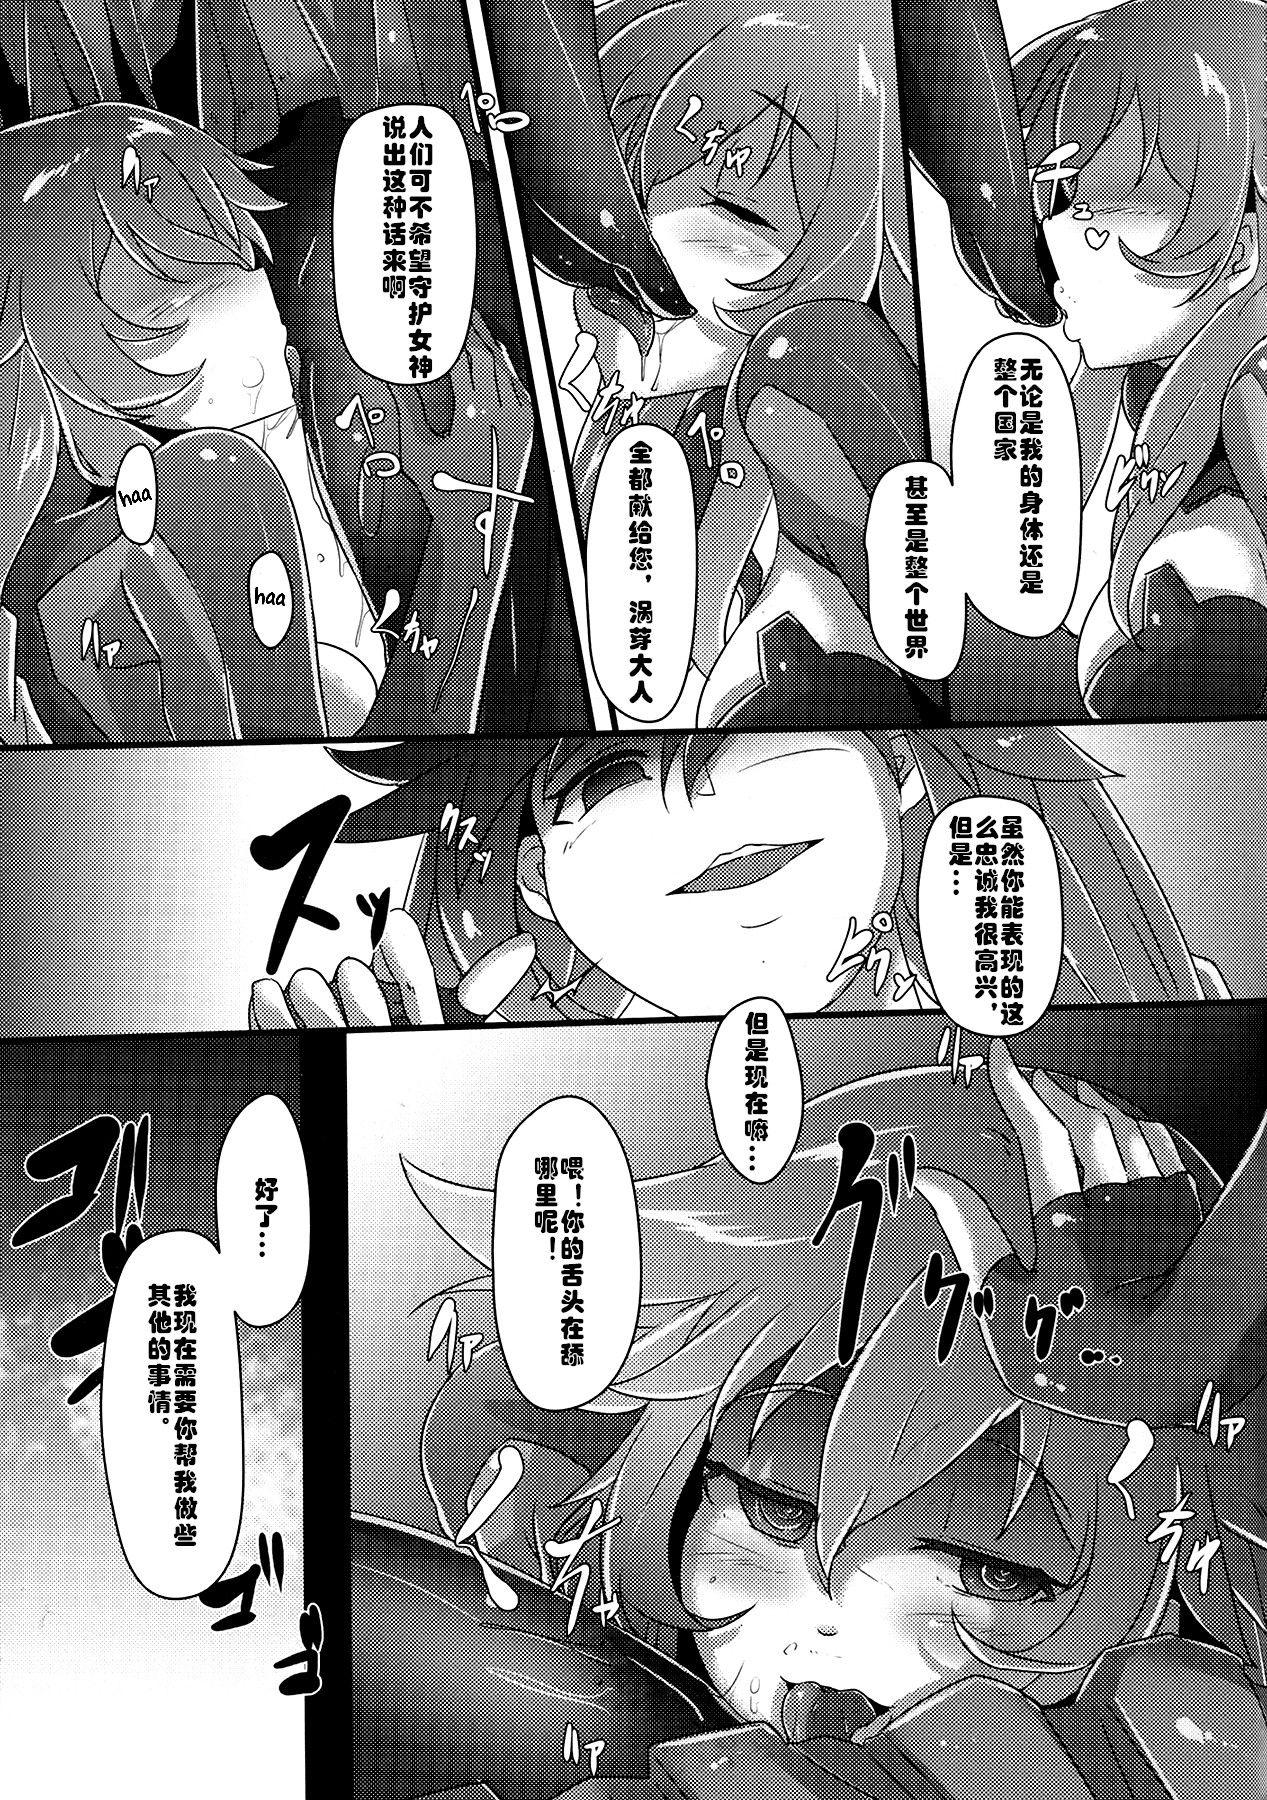 Web Cam After the Nightmare - Hyperdimension neptunia Boss - Page 5